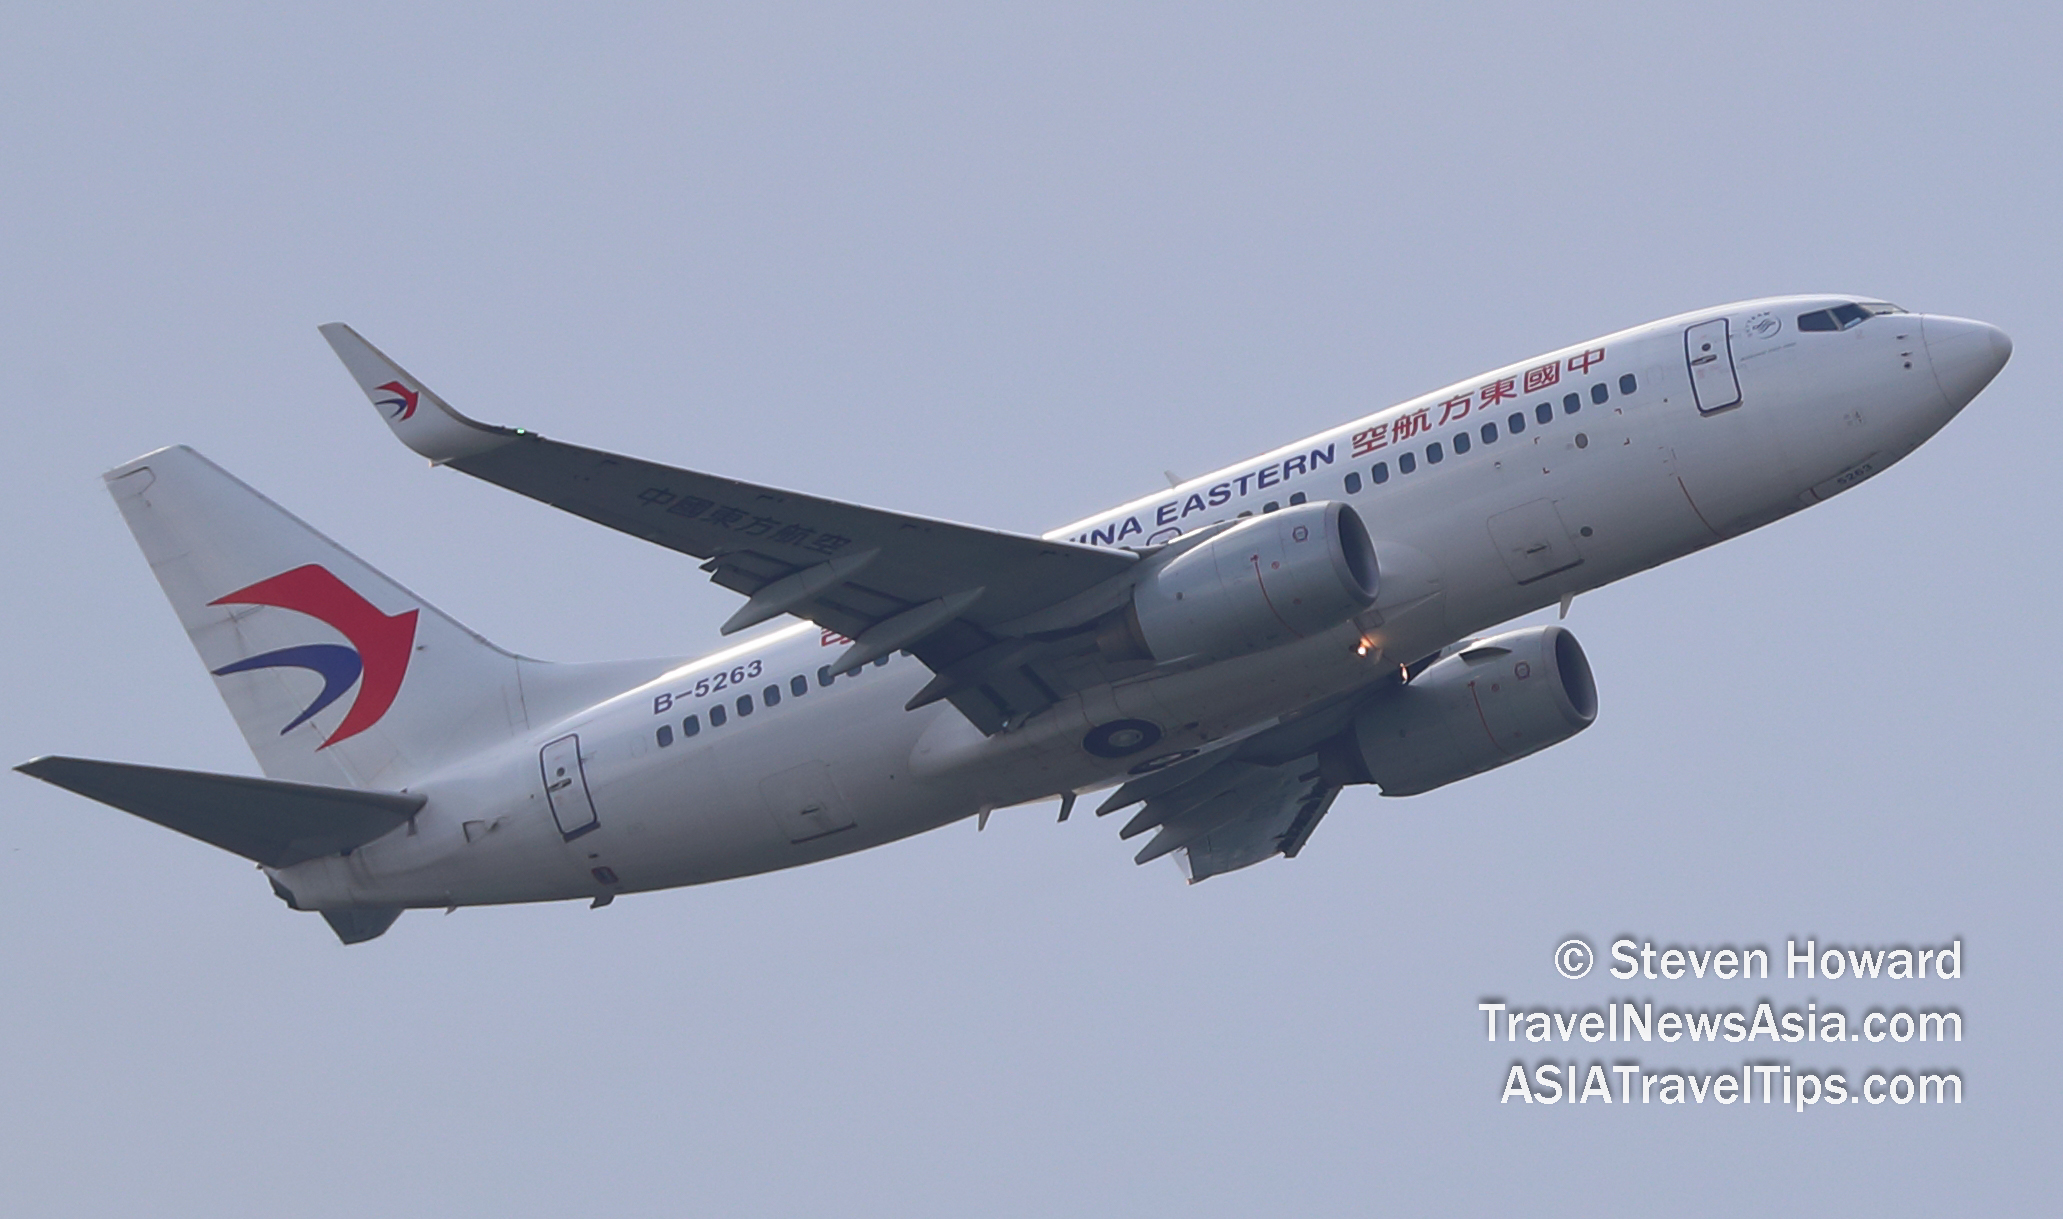 China Eastern Boeing 737 reg: B-5263. Picture by Steven Howard of TravelNewsAsia.com Click to enlarge.